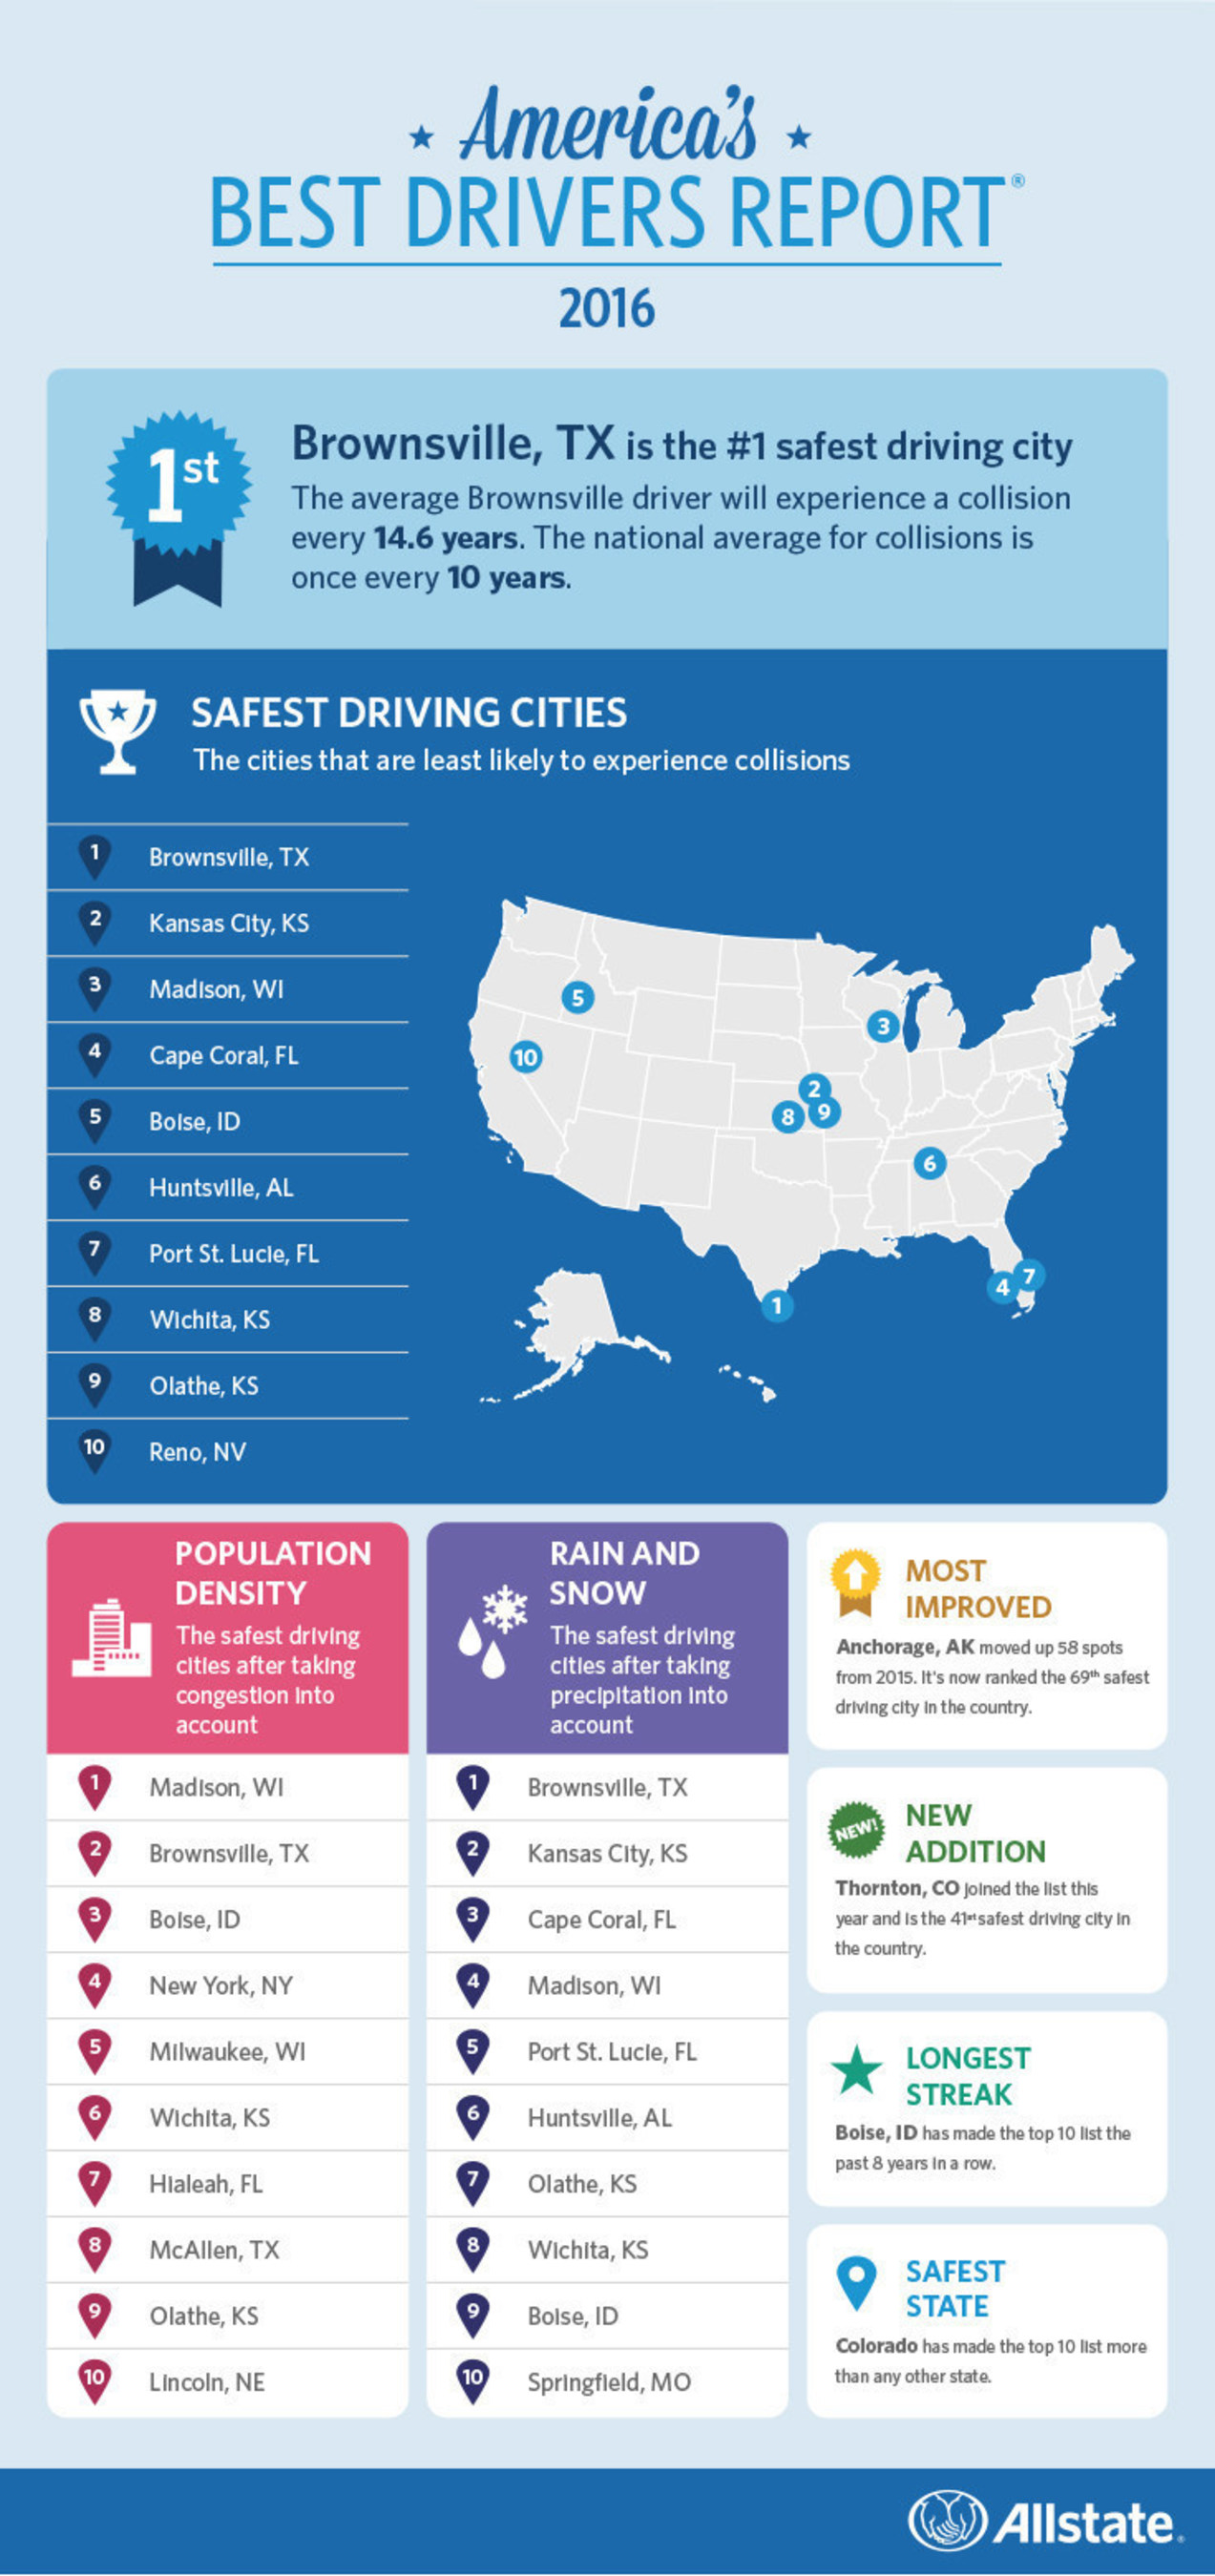 Top 10 safest driving cities in Amercia: Allstate's Best Drivers Report(R)